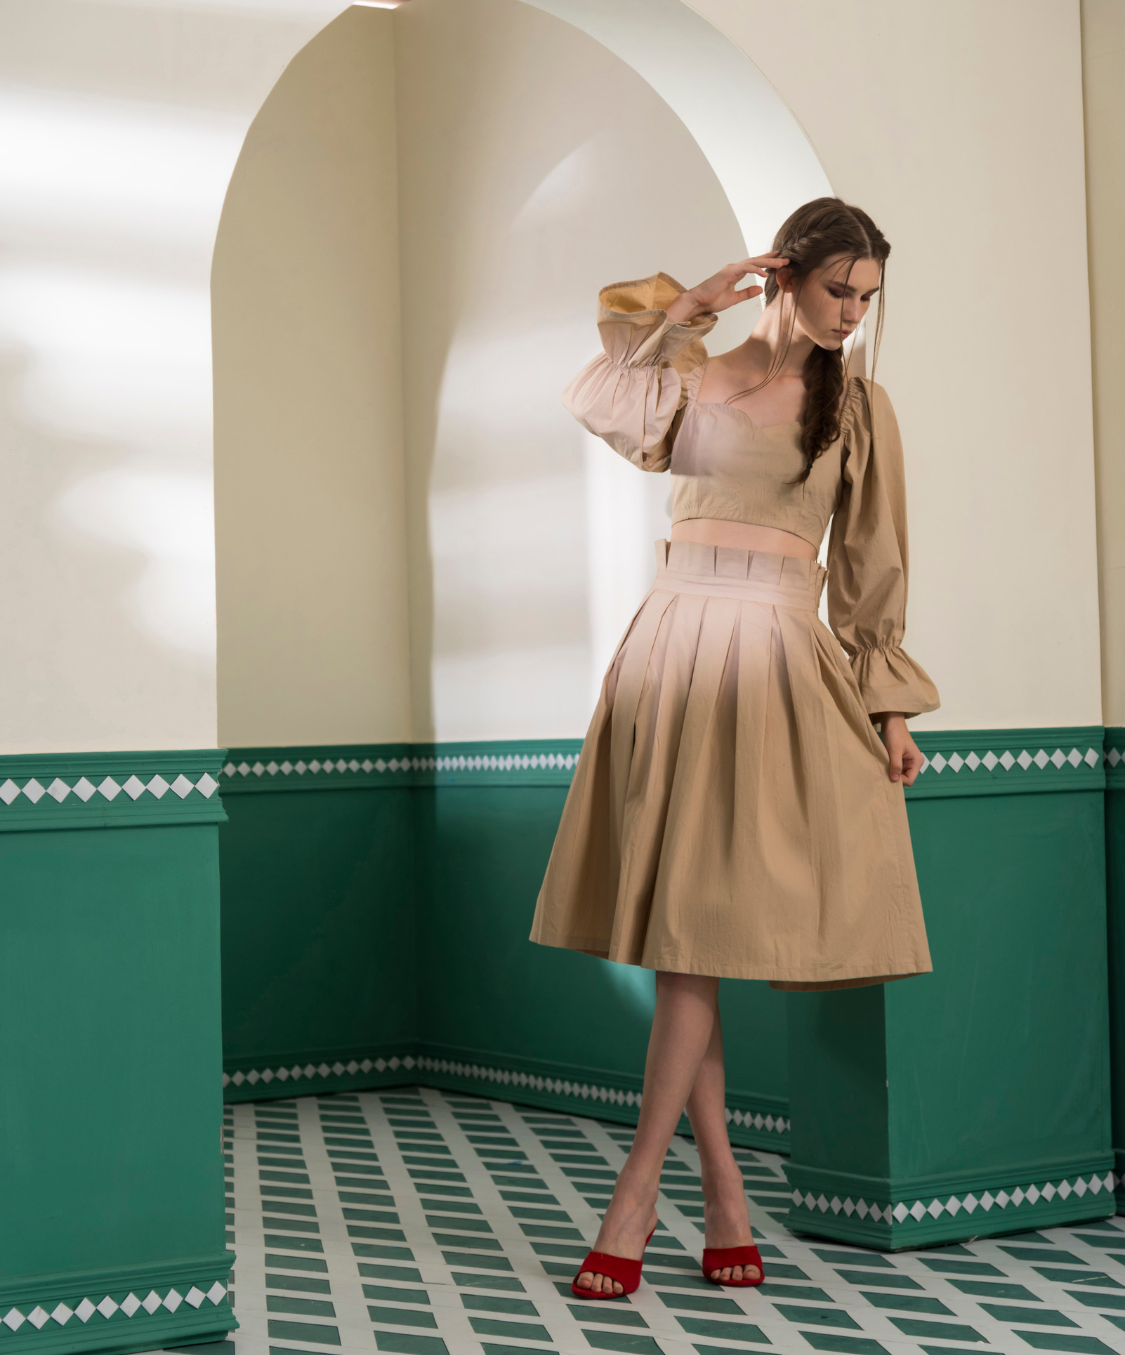 VICTORIA SKIRT - BEIGE, a product by Kelby Huston